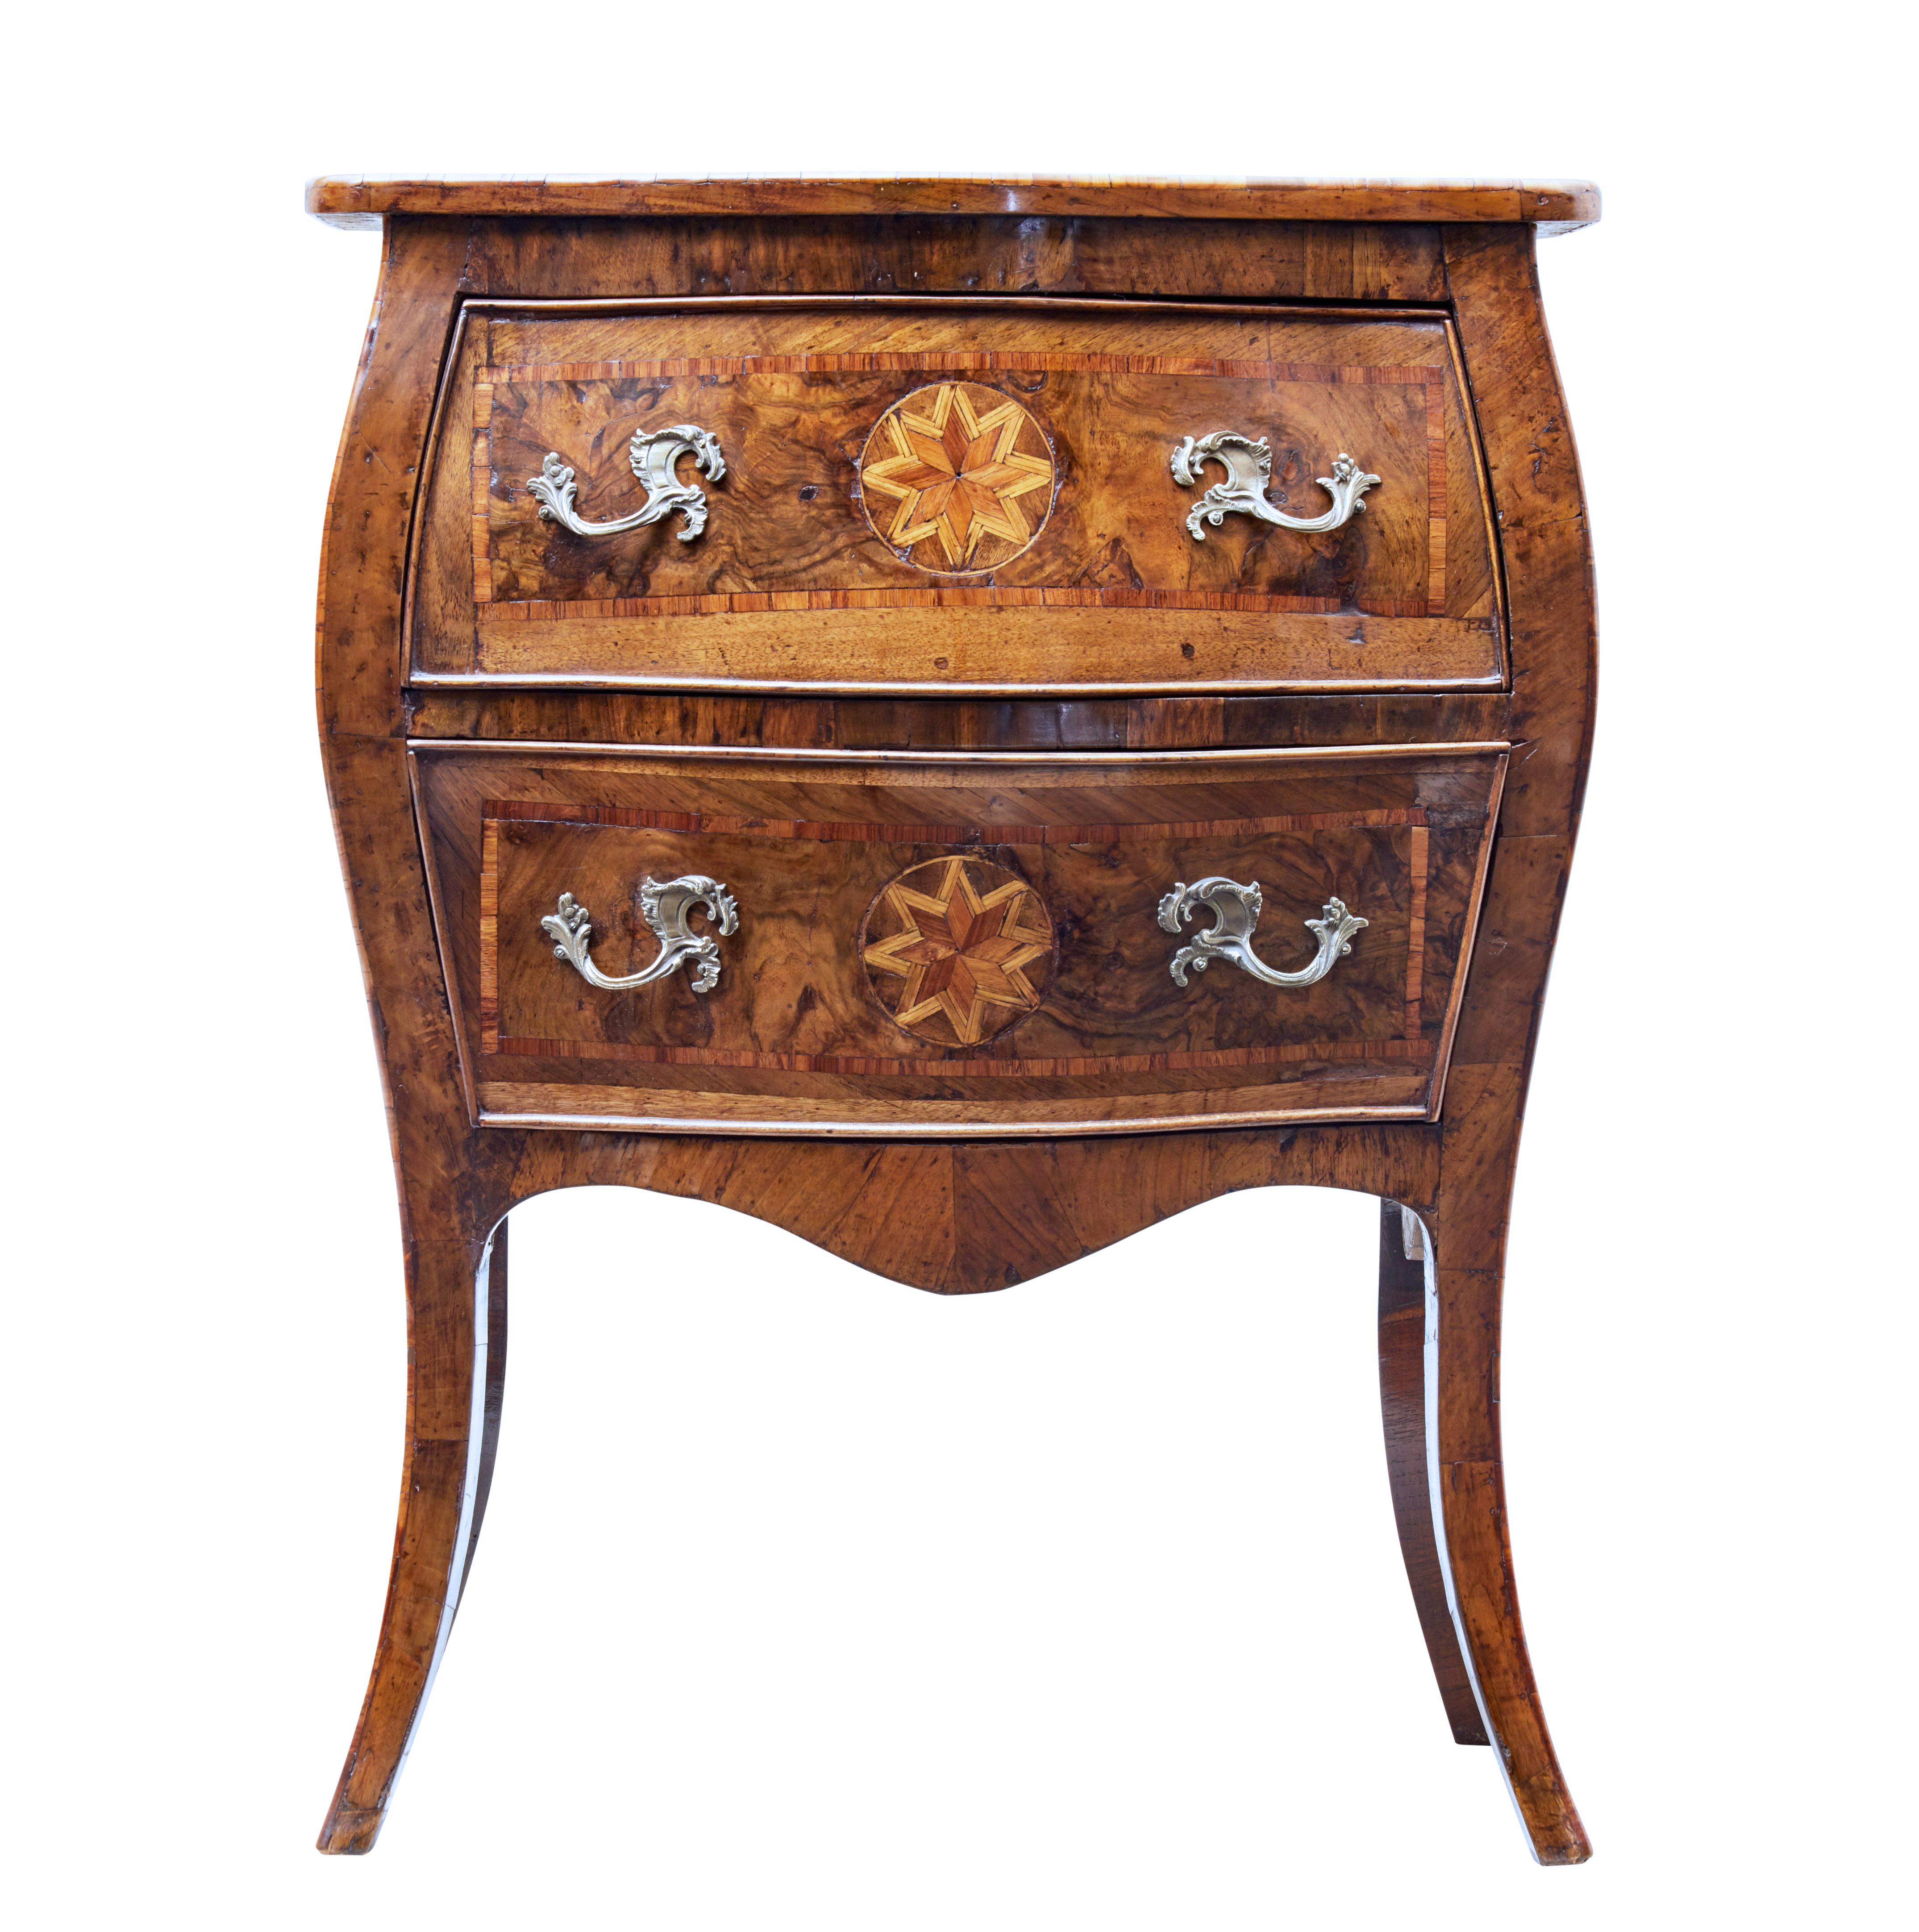 Mid-19th century walnut inlaid Maltese commode, circa 1850.

Delightful Maltese inlaid commode of small proportions.

Inlaid and crossbanded with various exotic woods. Star motif to the top surface, drawer fronts and sides. 2 deep drawers with